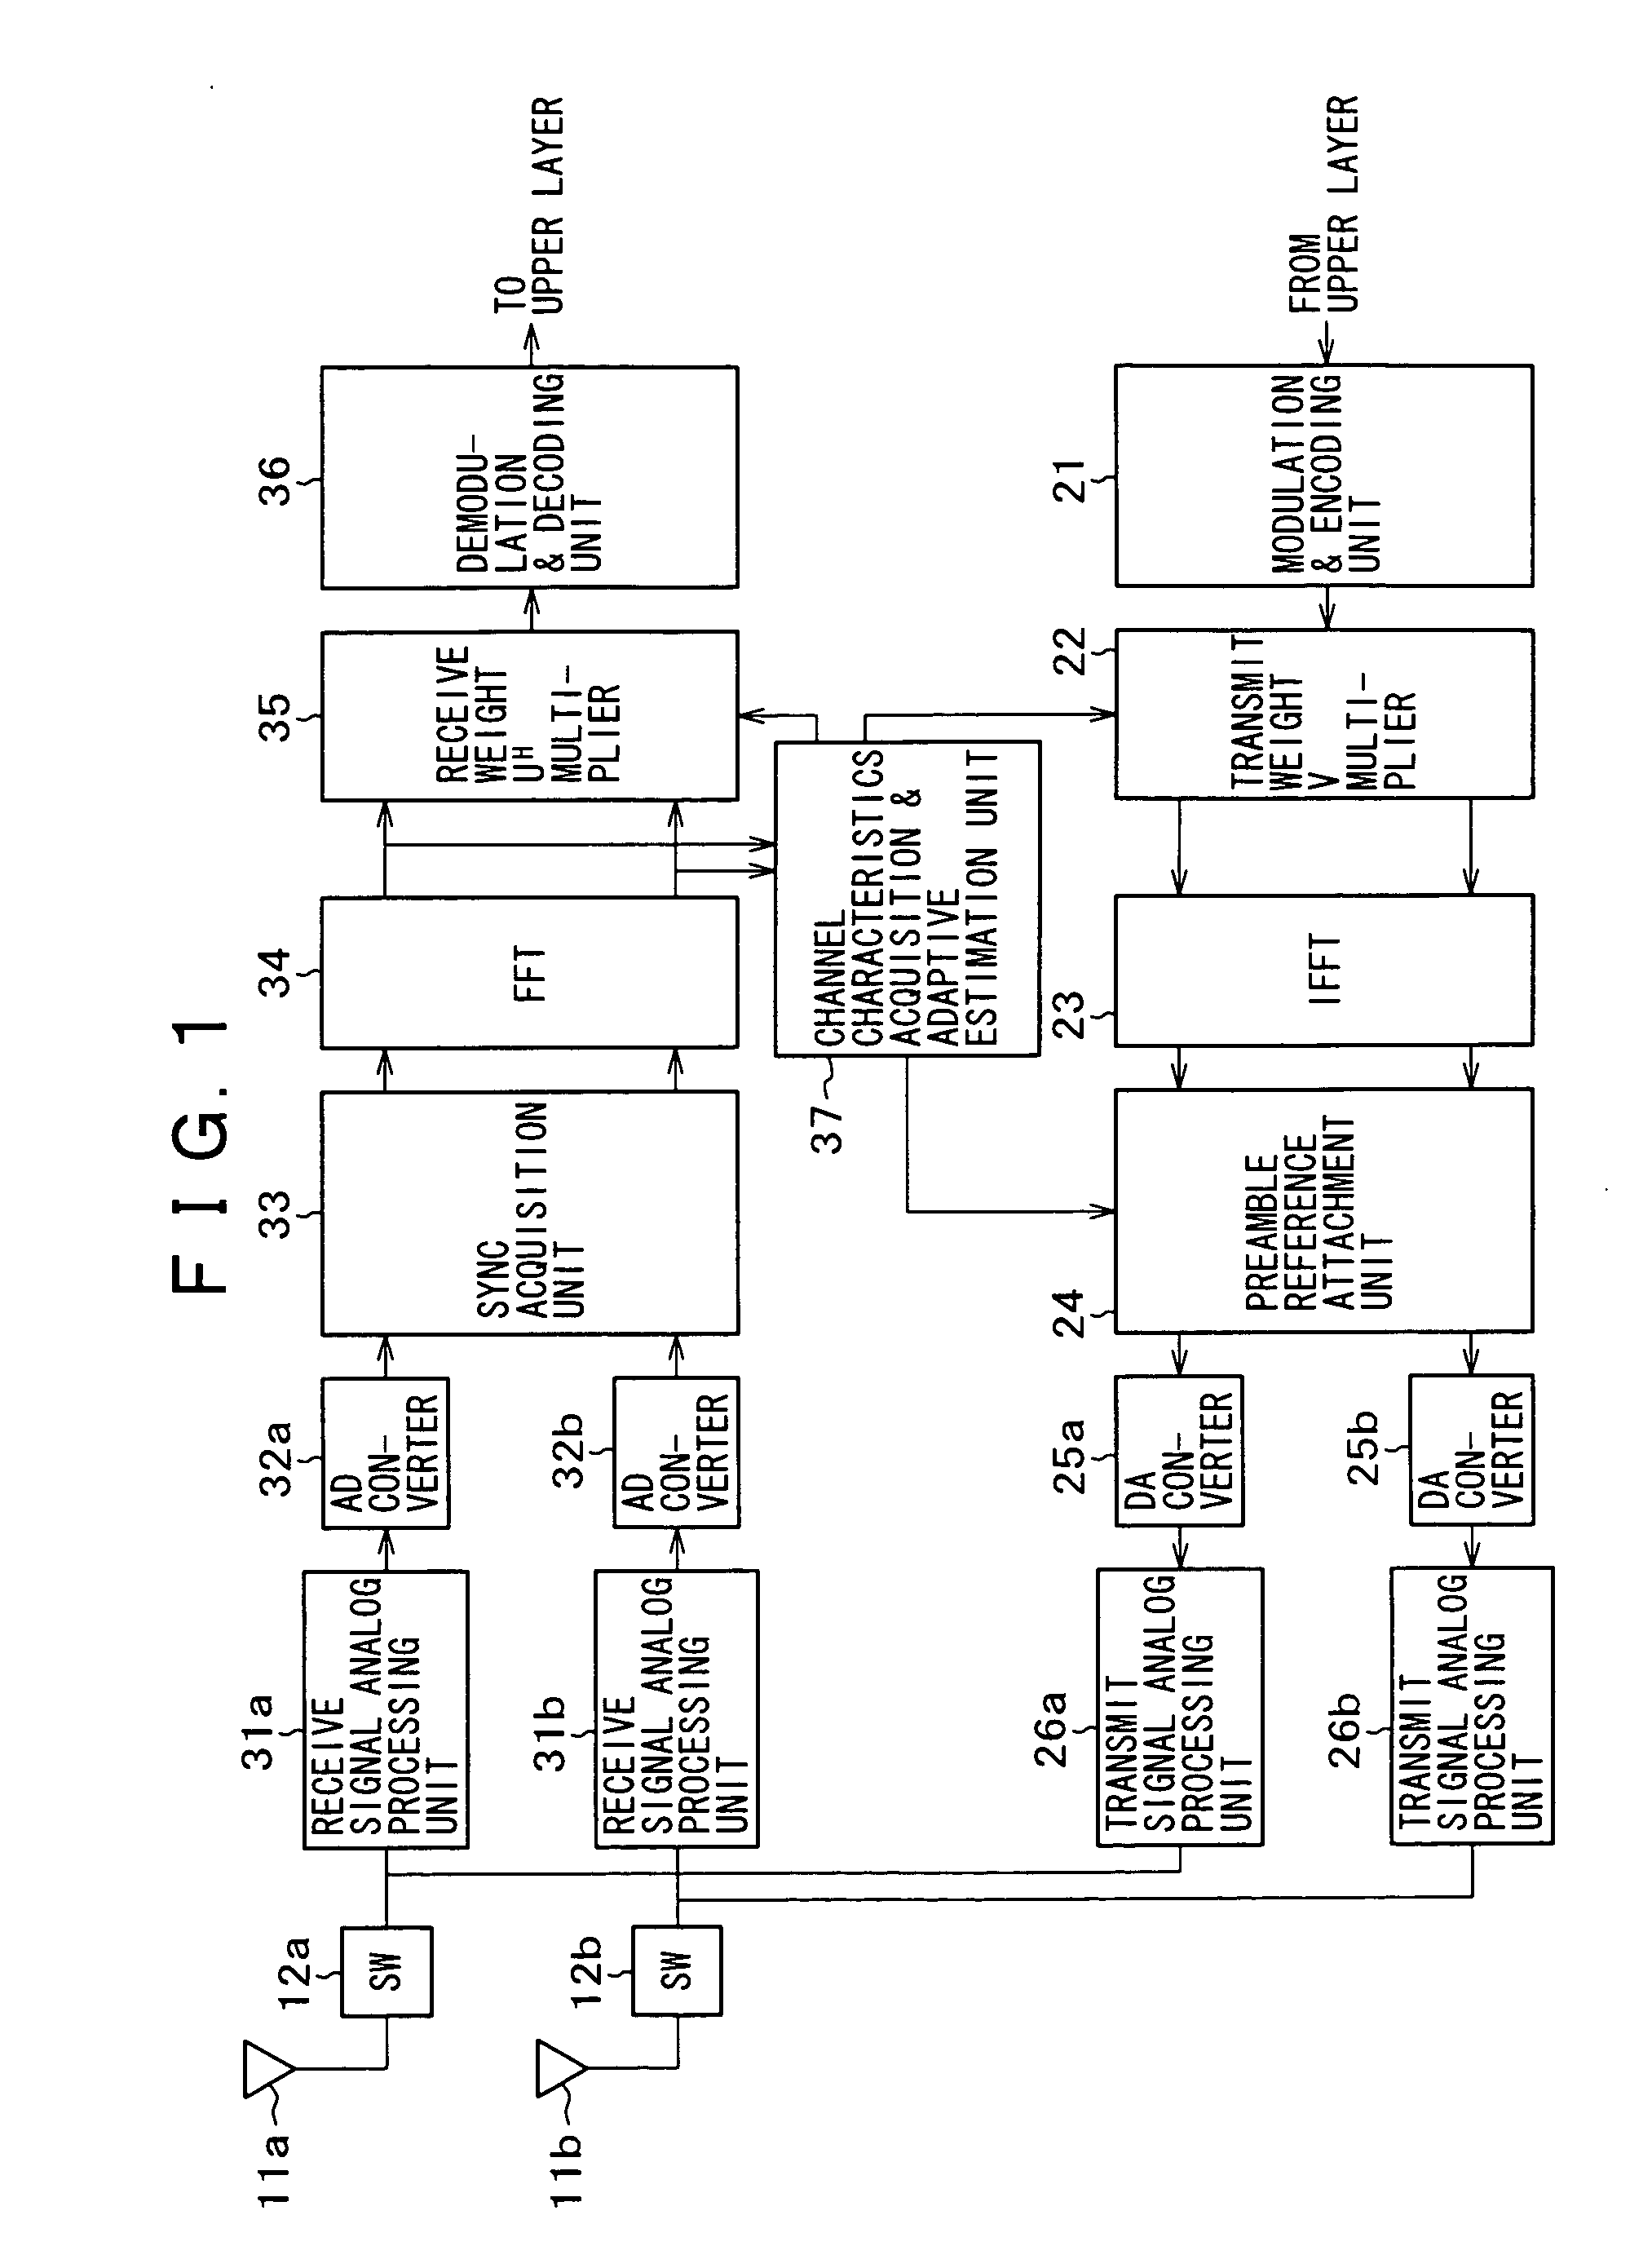 System, method, apparatus, and computer program for wireless communication